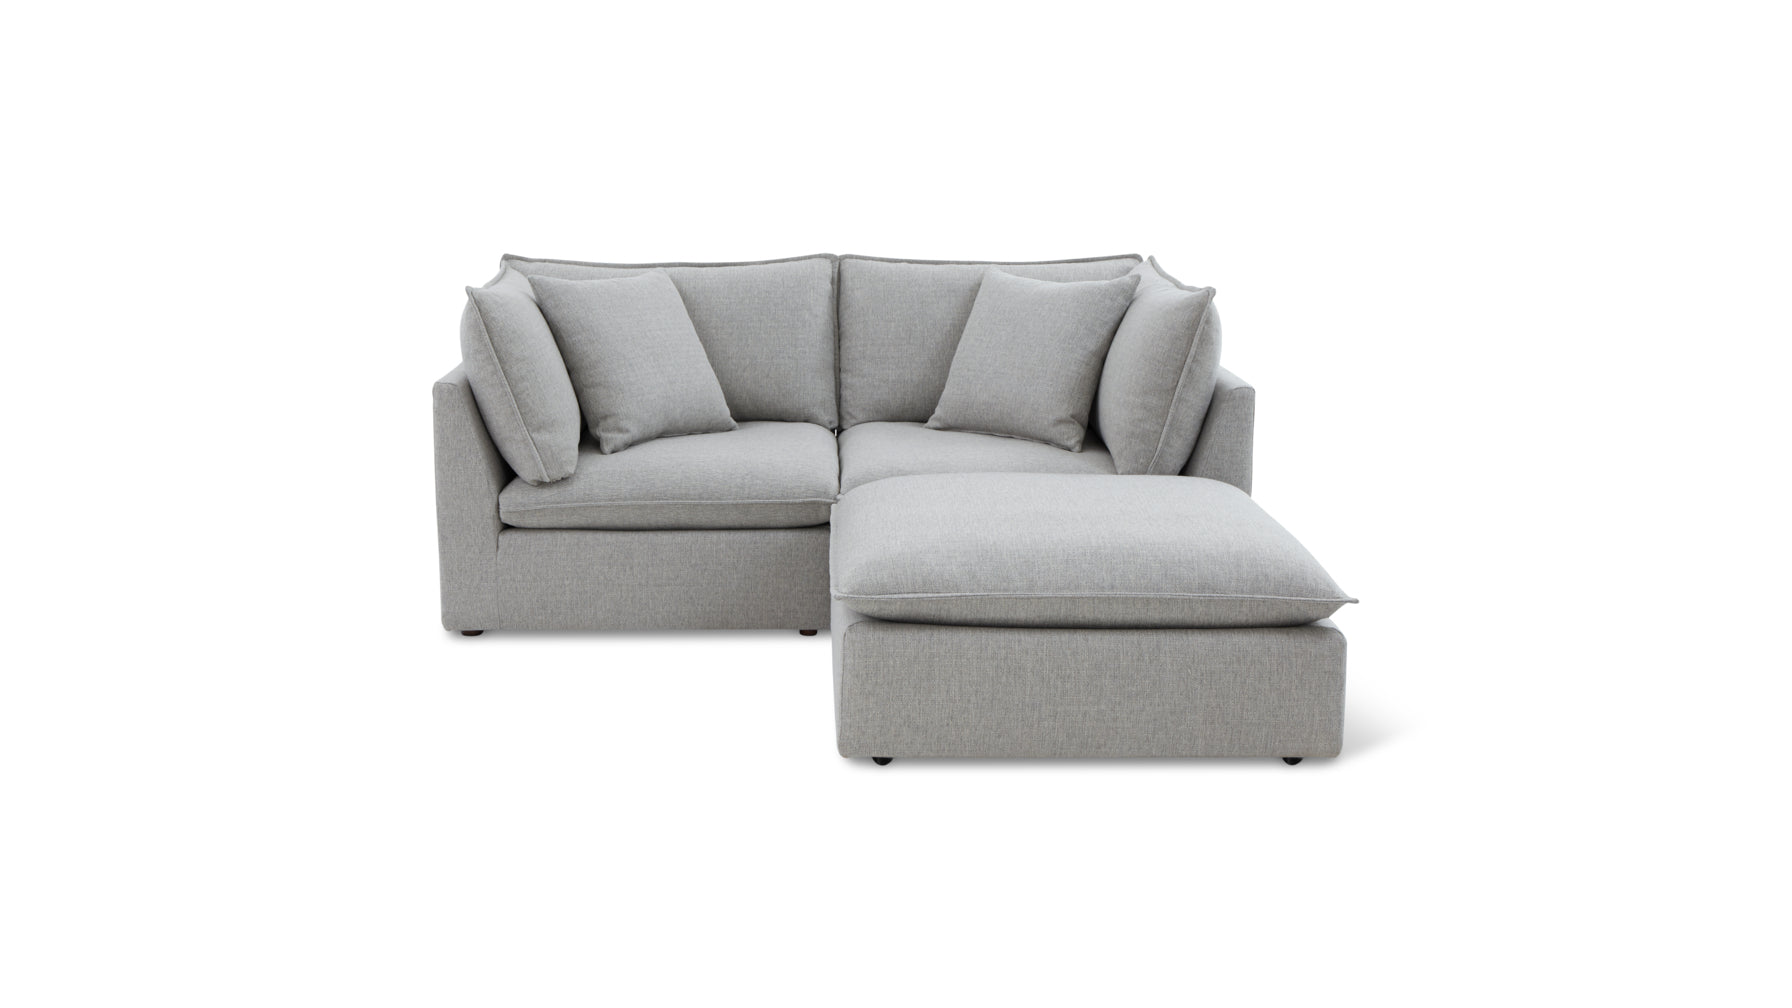 Chill Time 3-Piece Modular Sectional, Heather - Image 1